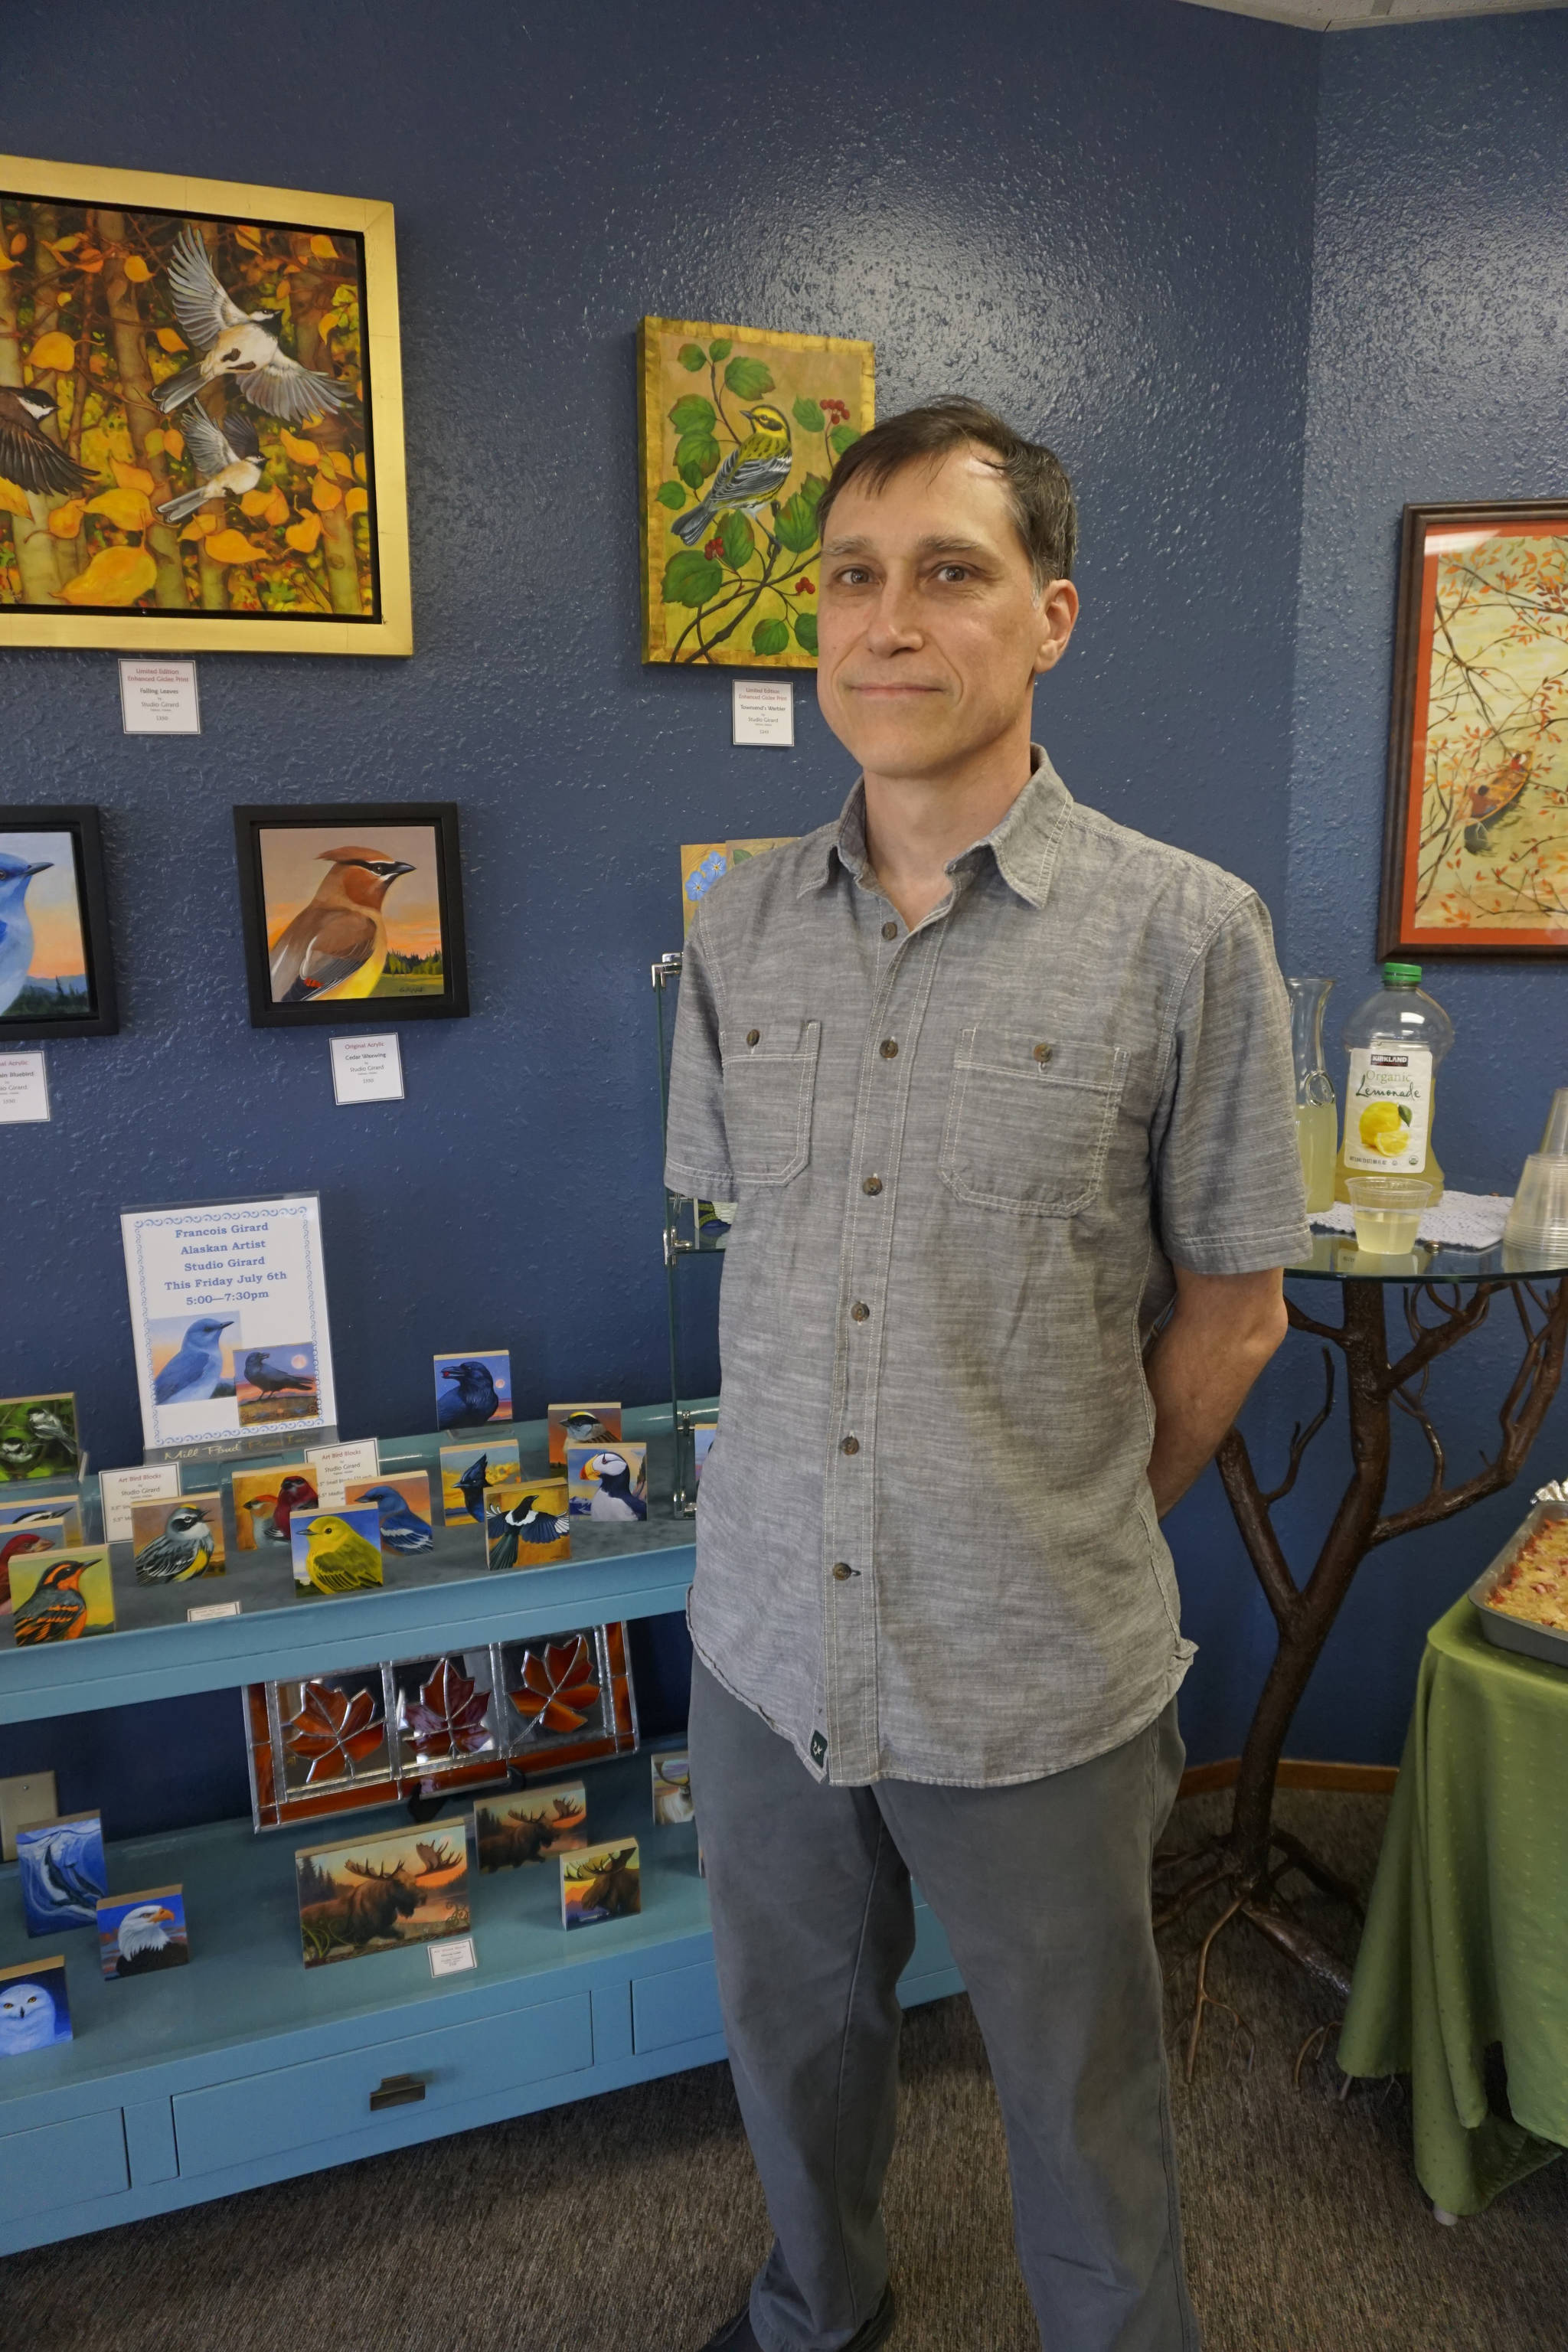 Bird is the word Palmer artist Francois Girard stands by art from his show, “Alaska Wings,” at the First Friday opening on July 6 at the Art Shop Gallery in Homer, Alaska. Girard creates sculptures he calls “Bird Blocks” made from prints adhered to wood and varnished. He also displays some of his original paintings. (Photo by Michael Armstrong/Homer News)